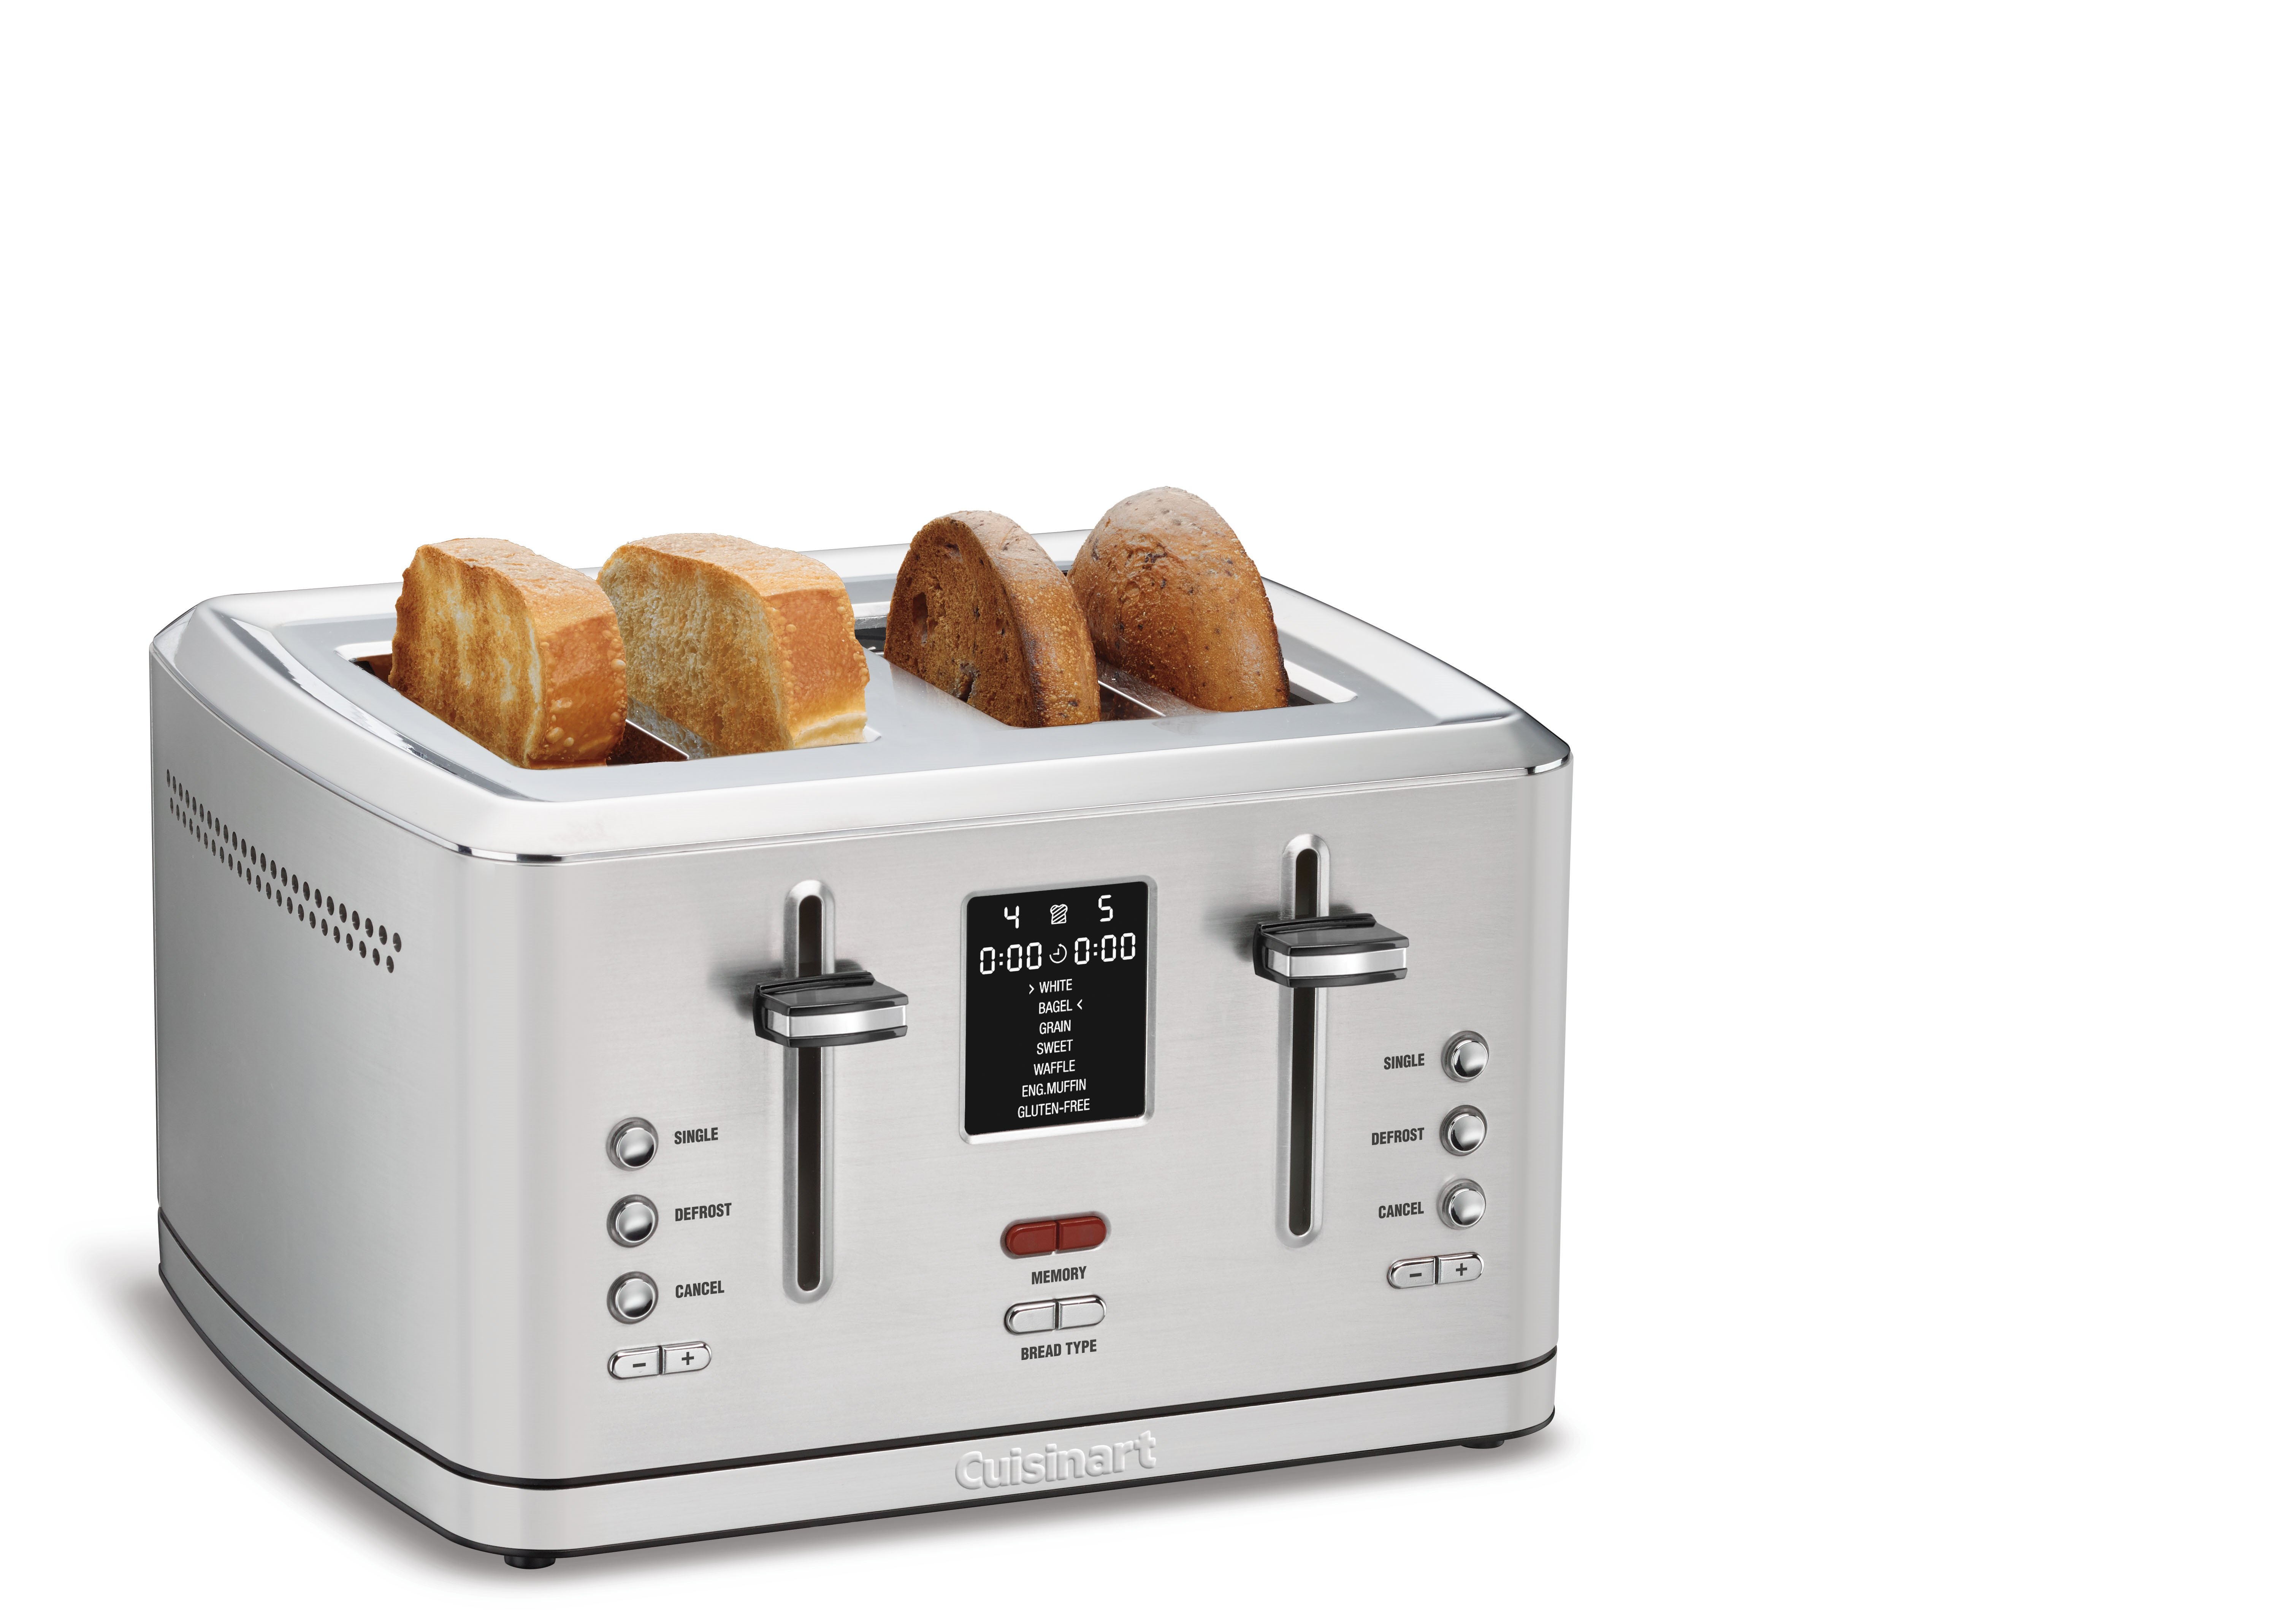 4-Slice Digital Toaster with MemorySet Feature - Cuisinart.com